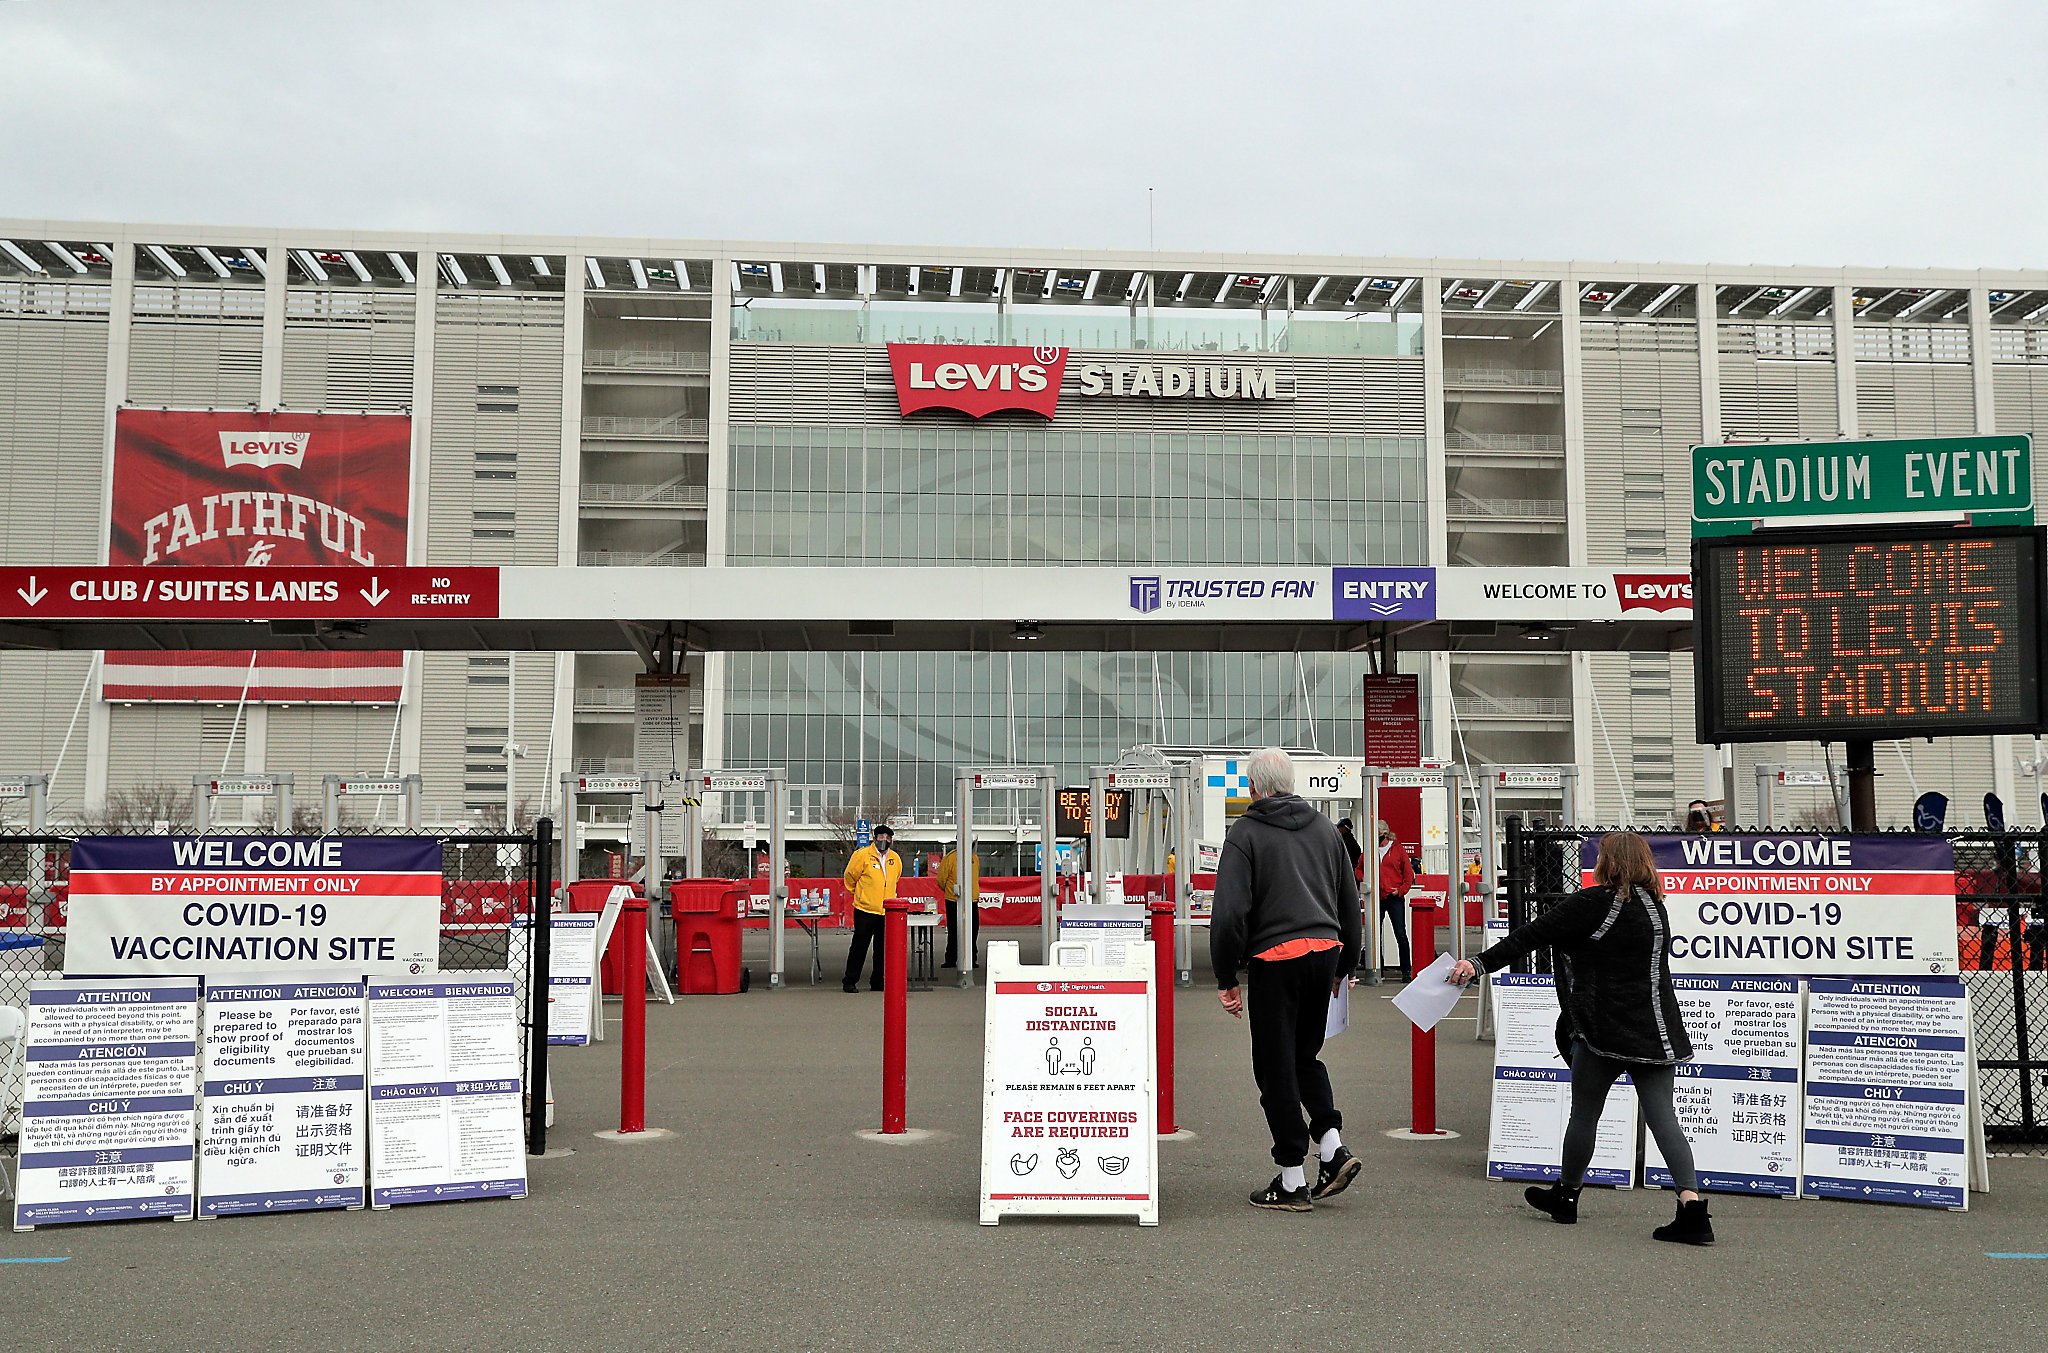 49ers tap team of experts for advice on returning to Levi's Stadium